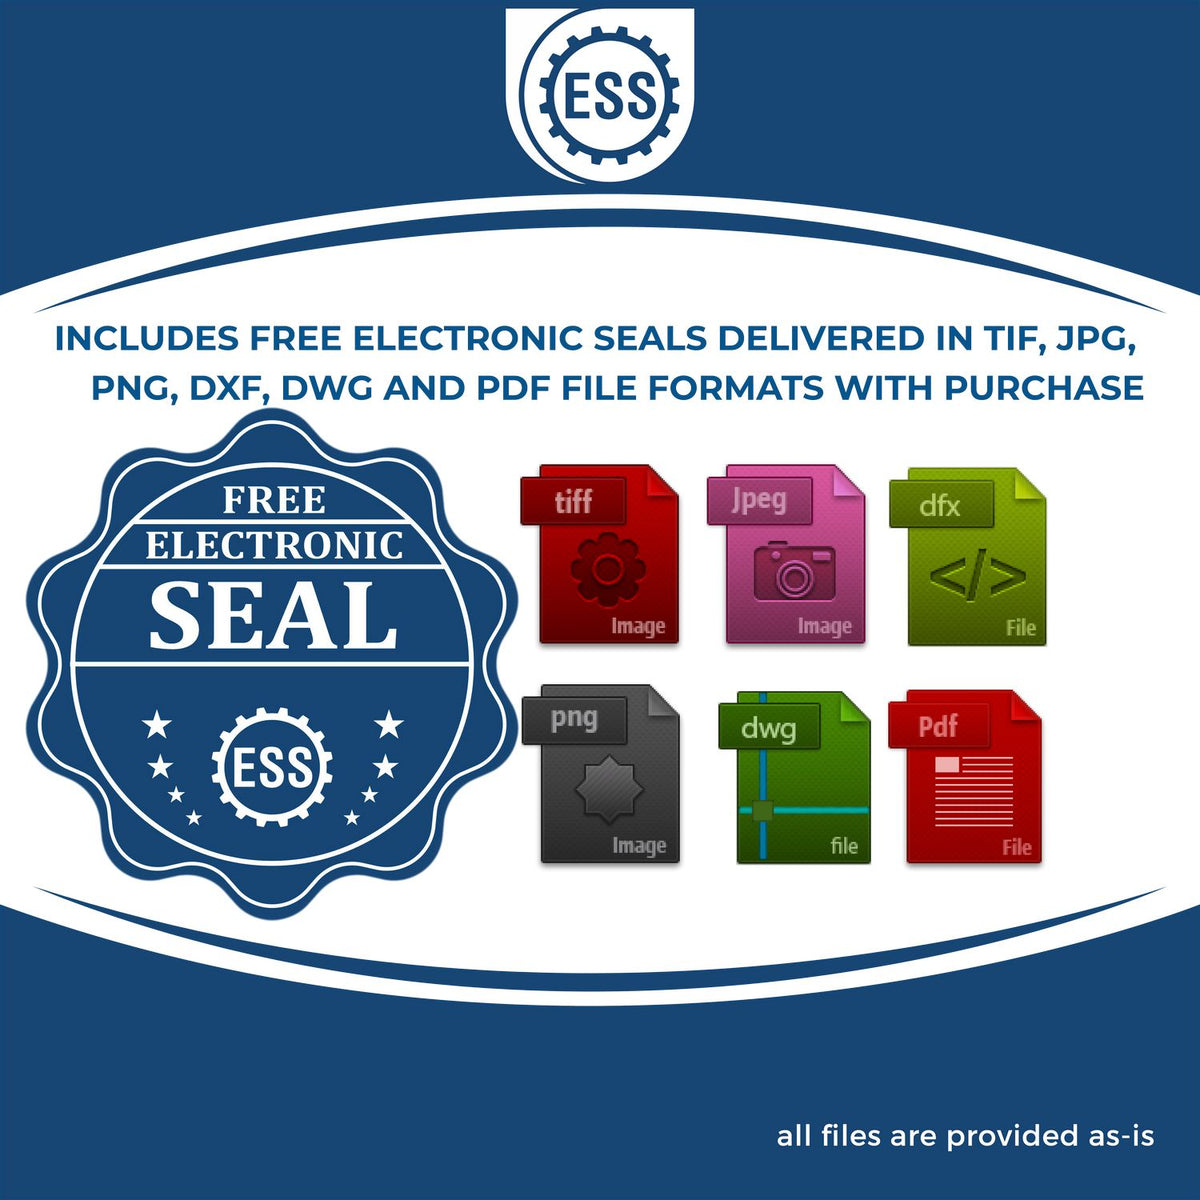 An infographic for the free electronic seal for the Georgia Geologist Desk Seal illustrating the different file type icons such as DXF, DWG, TIF, JPG and PNG.